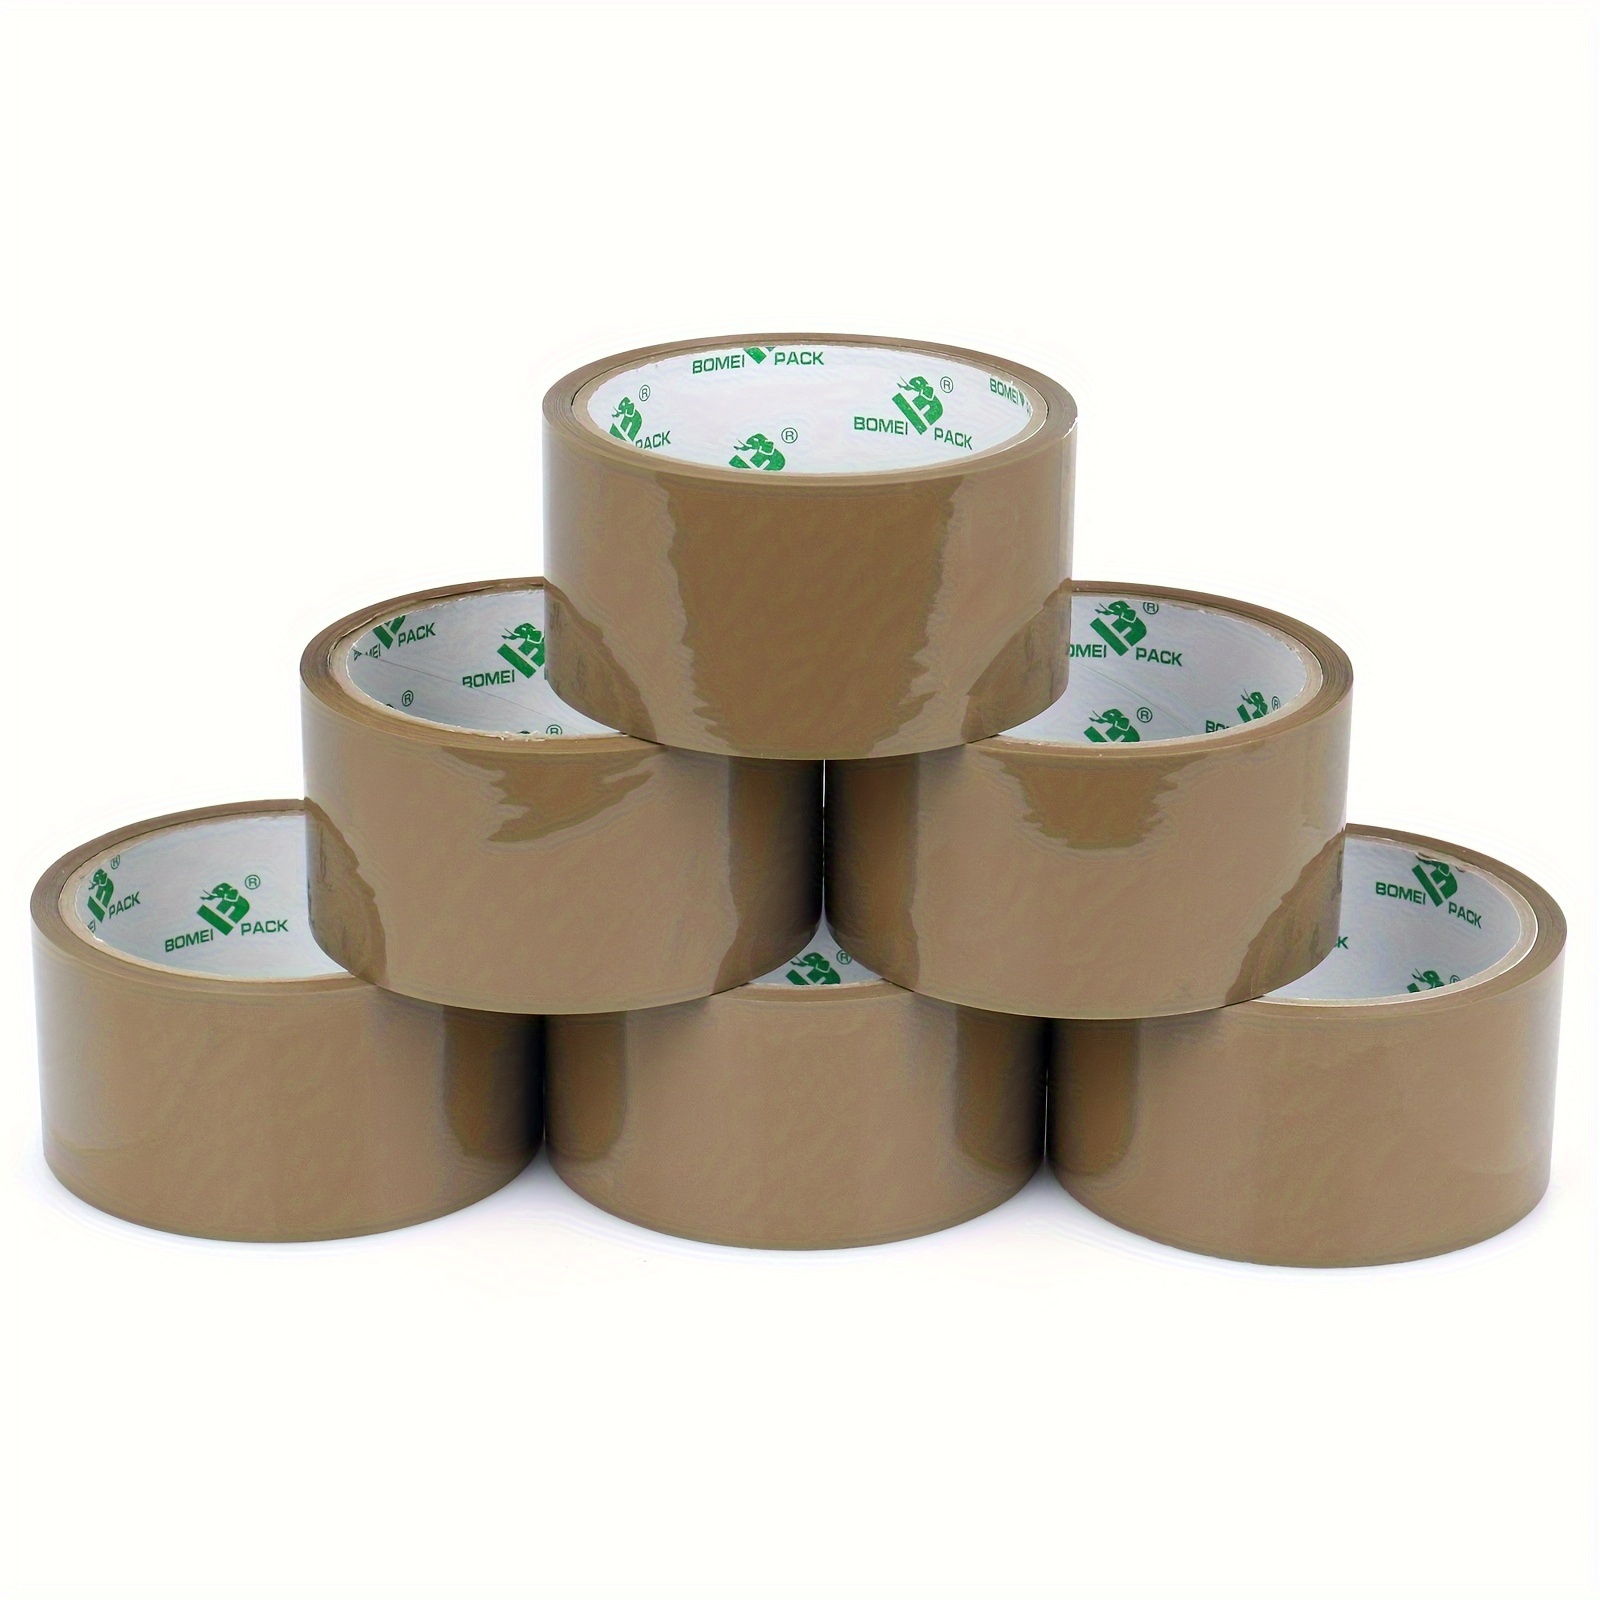 

Bomei Pack, Brown Tape, 6 Pcs, Width 1.89 Inches X 30y, Heavy-duty Transport Tape, Sealing Tape, Coffee-colored Packaging Tape, Moving Tape, Used For Packing In Schools, Offices, Homes, And Factories